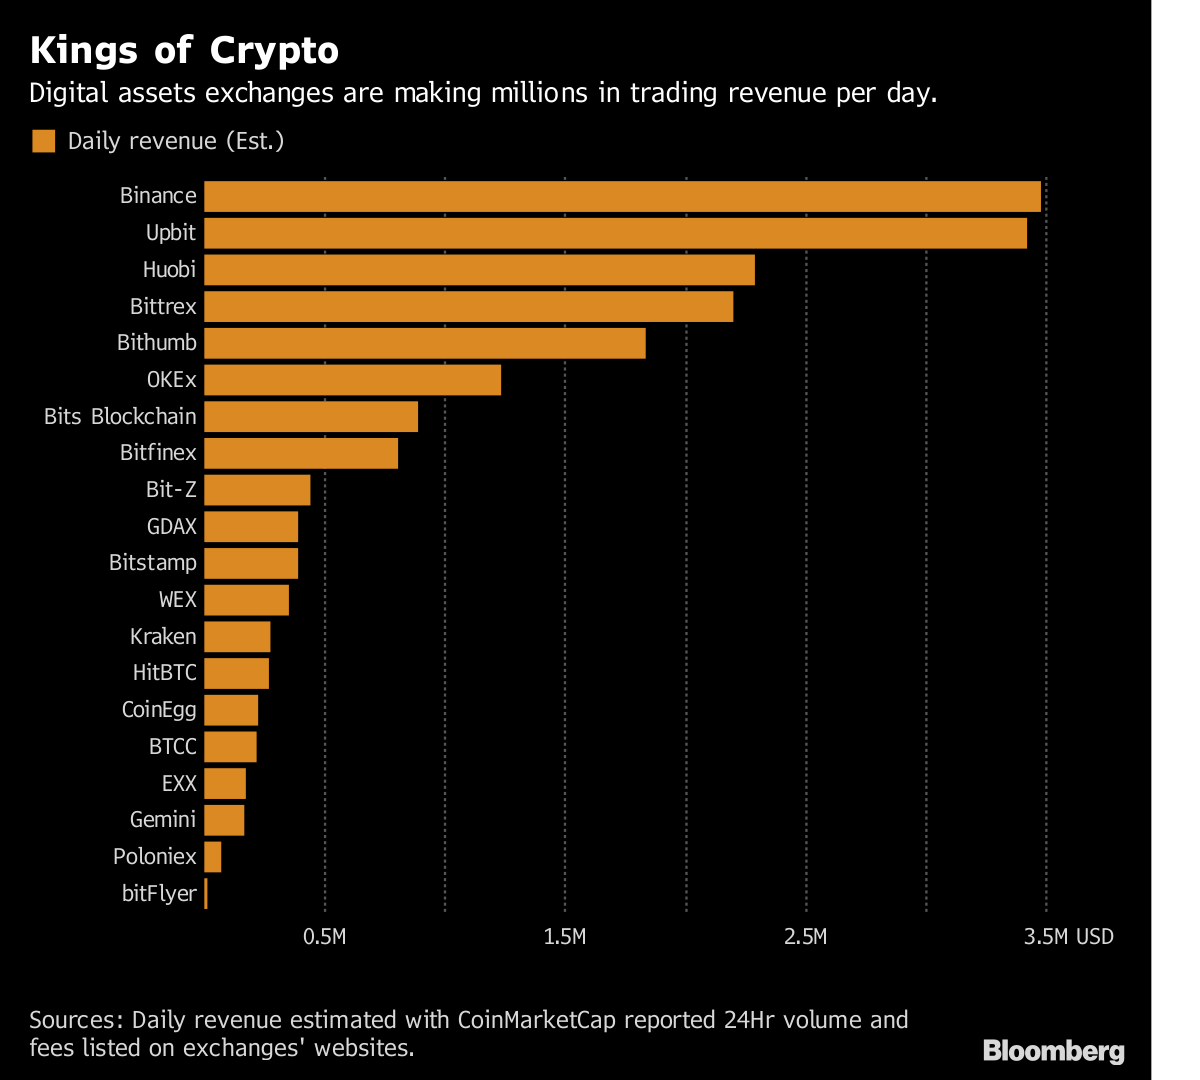 Crypto Exchanges Are Raking in Billions of Dollars - Bloomberg